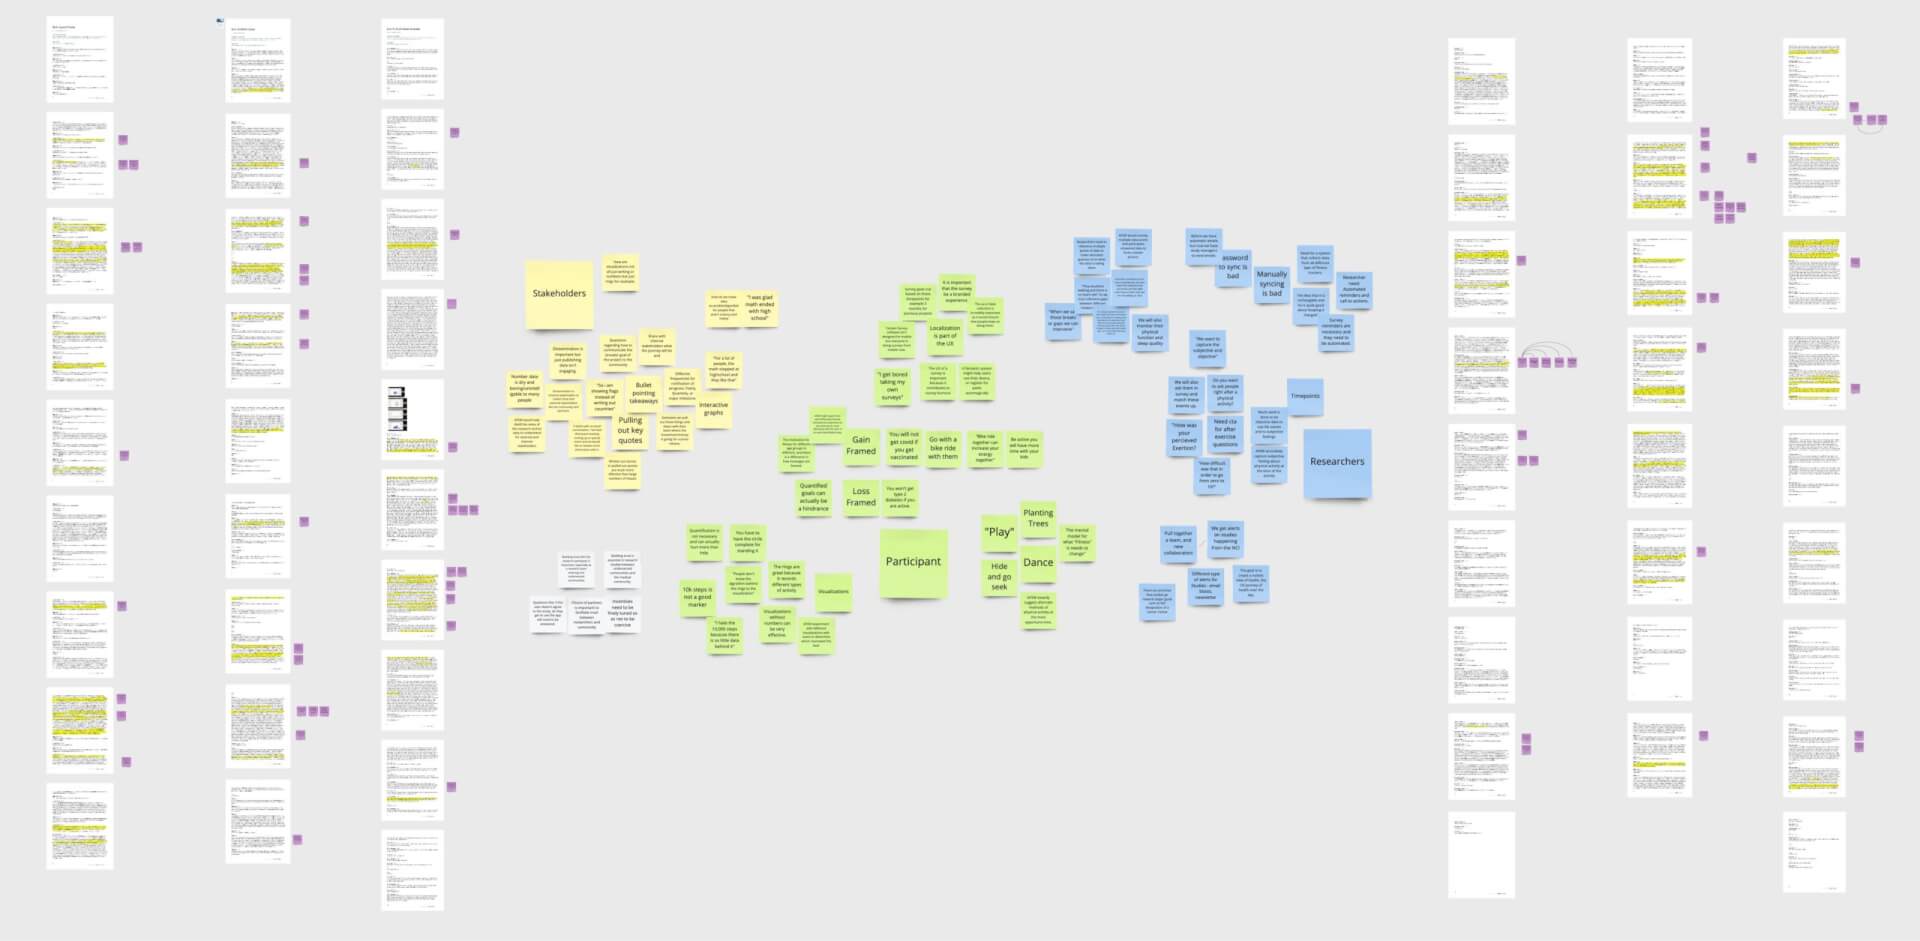 Screenshot of a work in progress, collection of insights from quotes pulled from transcripts on post-it-notes